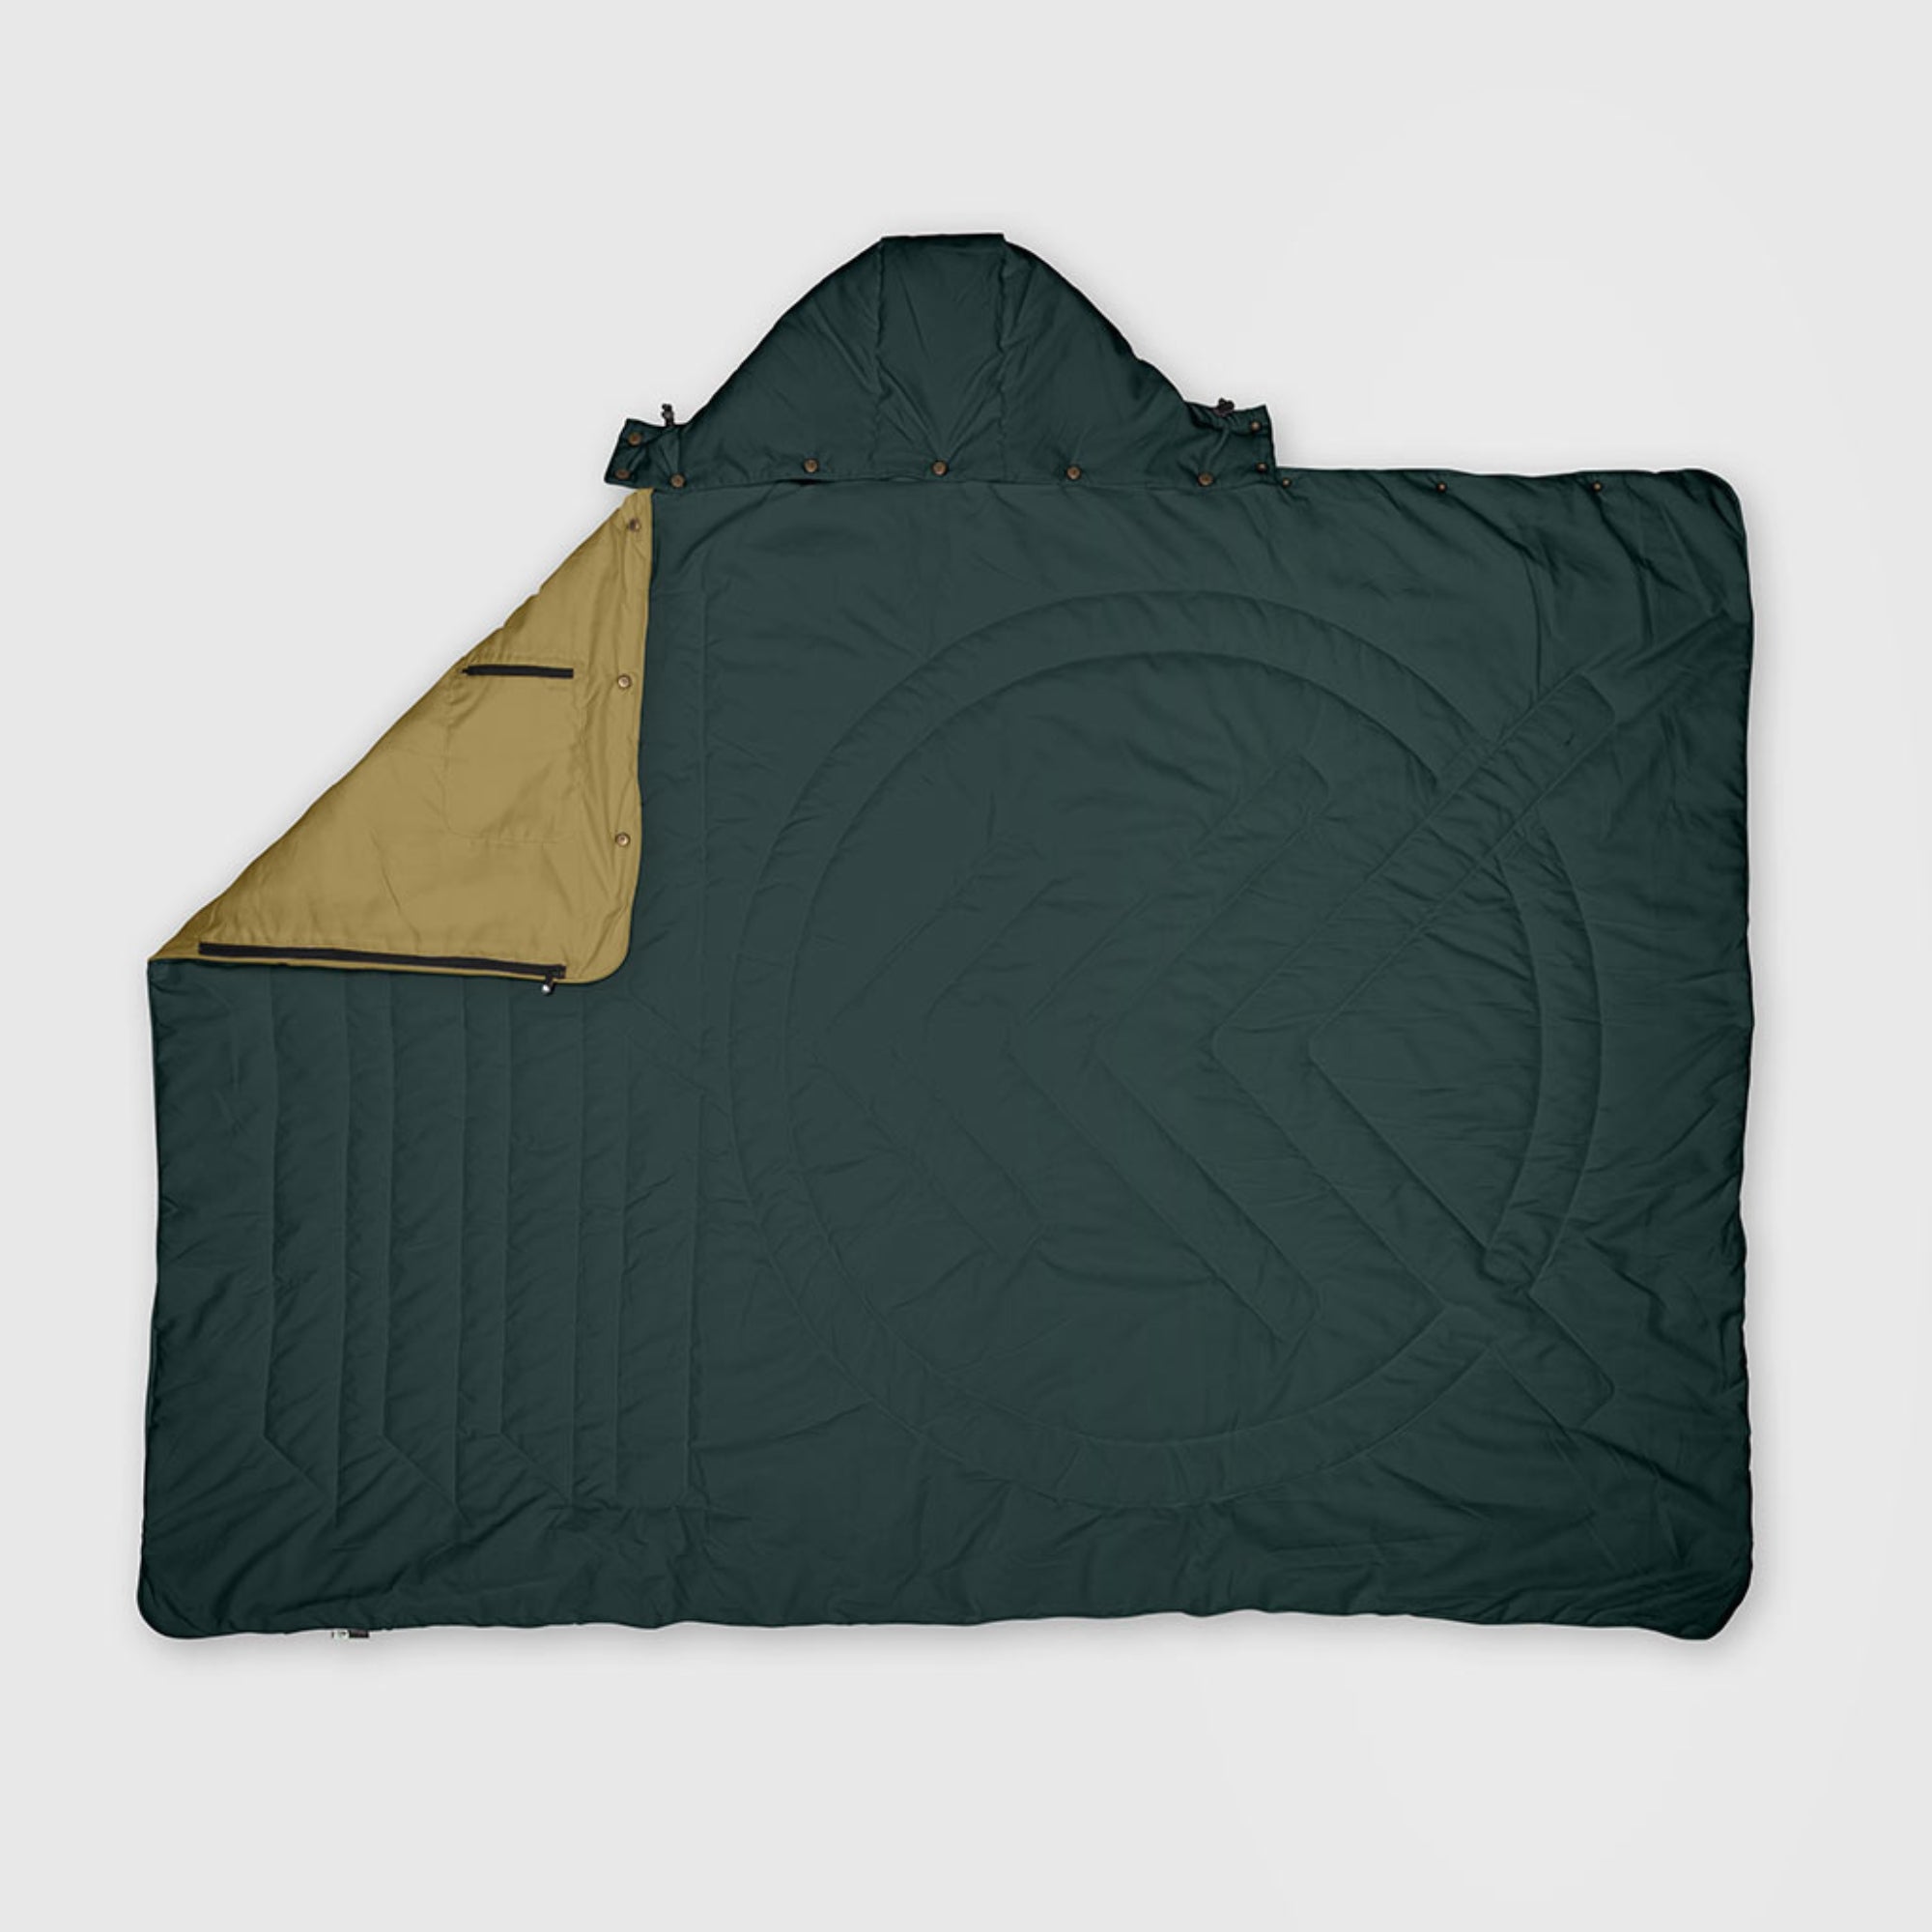 An Tracks ripstop duvet cover | Voited - Outlet